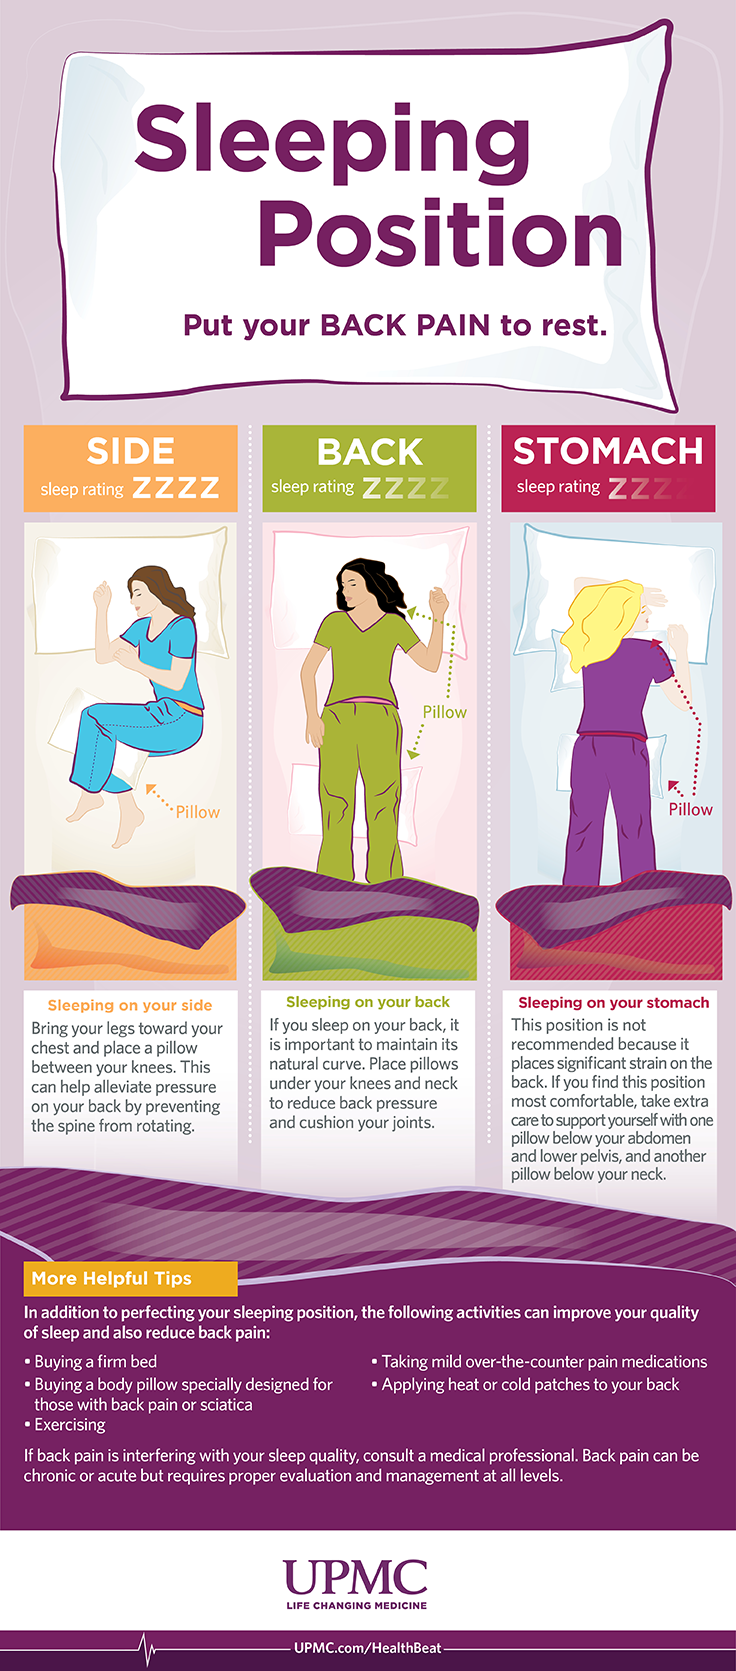 Learn more about different sleep positions